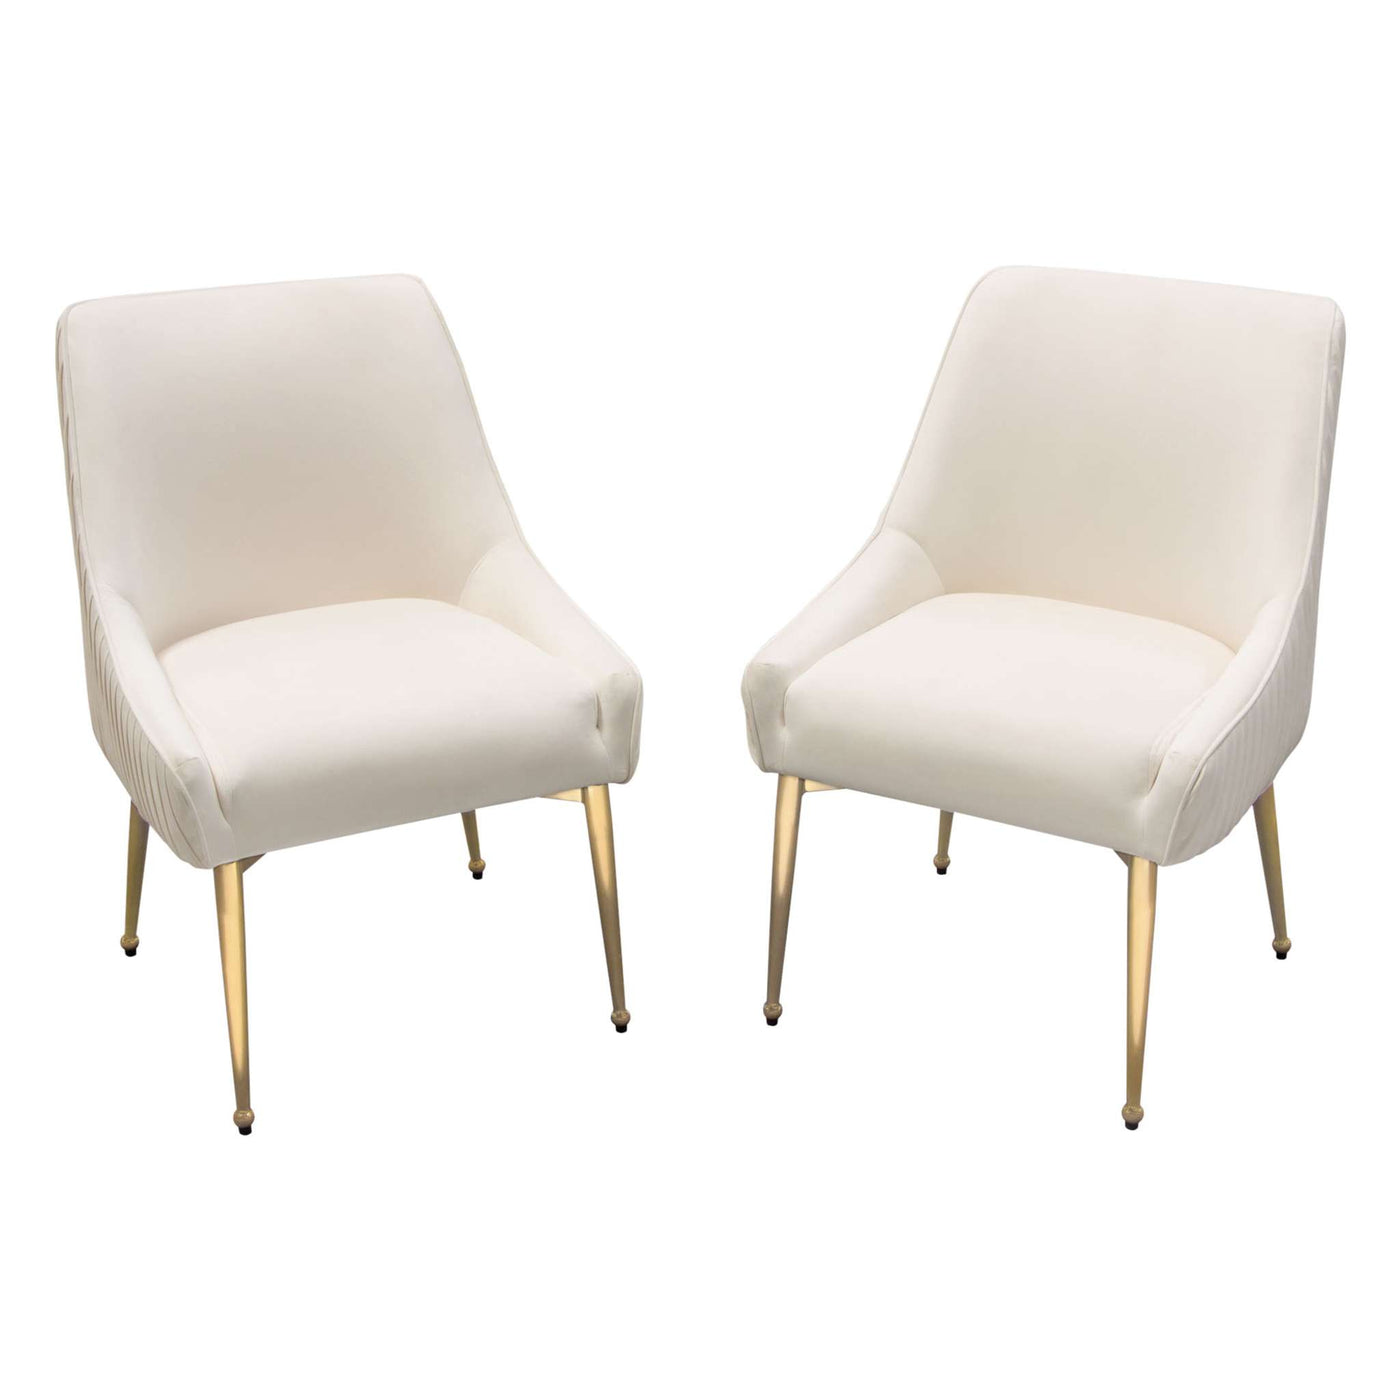 Set of (2) Quinn Dining Chairs w/ Vertical Outside Pleat Detail and Contoured Arm in Grey Velvet w/ Brushed Gold Metal Leg by Diamond Sofa